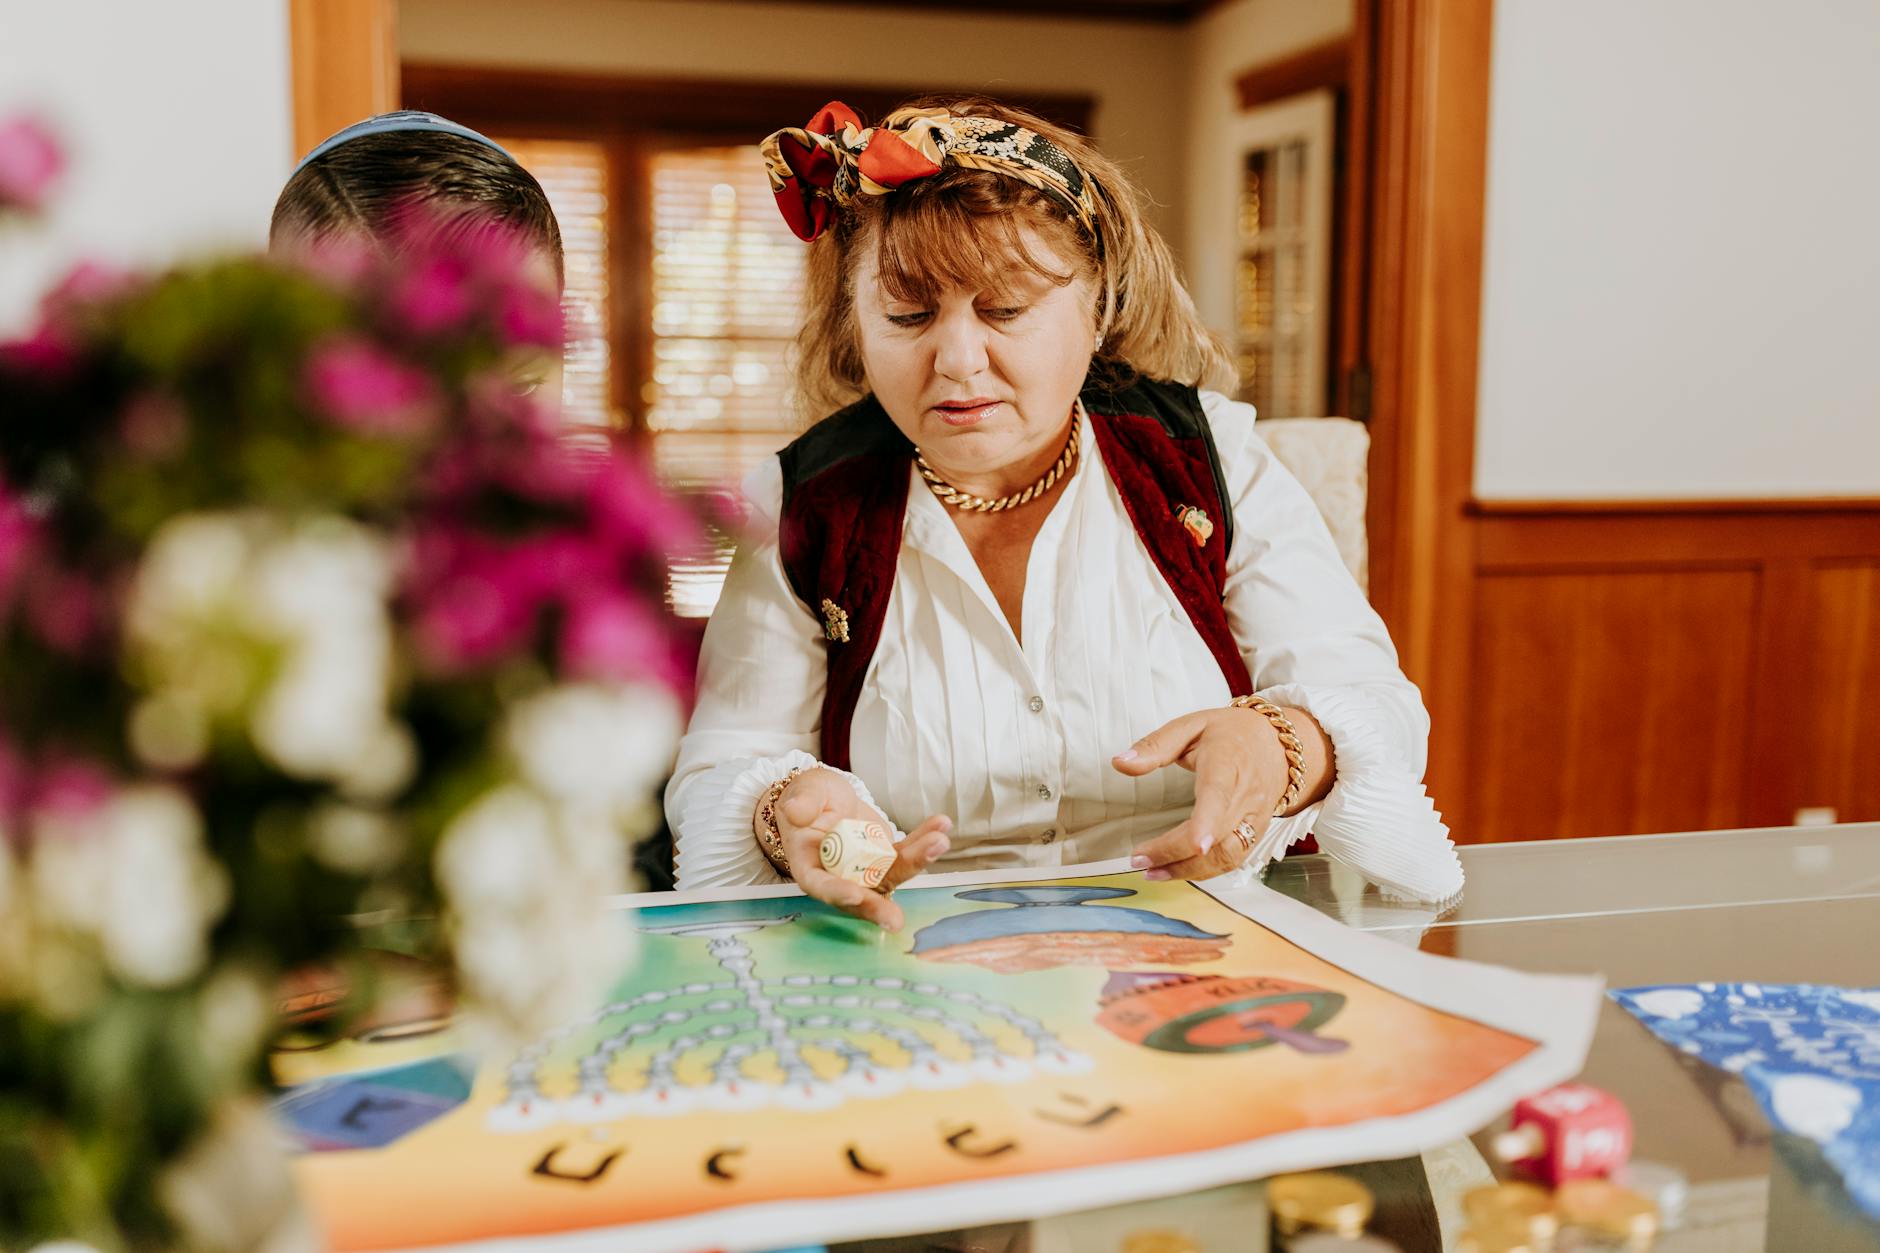 Photo Of Woman Playing Board Games